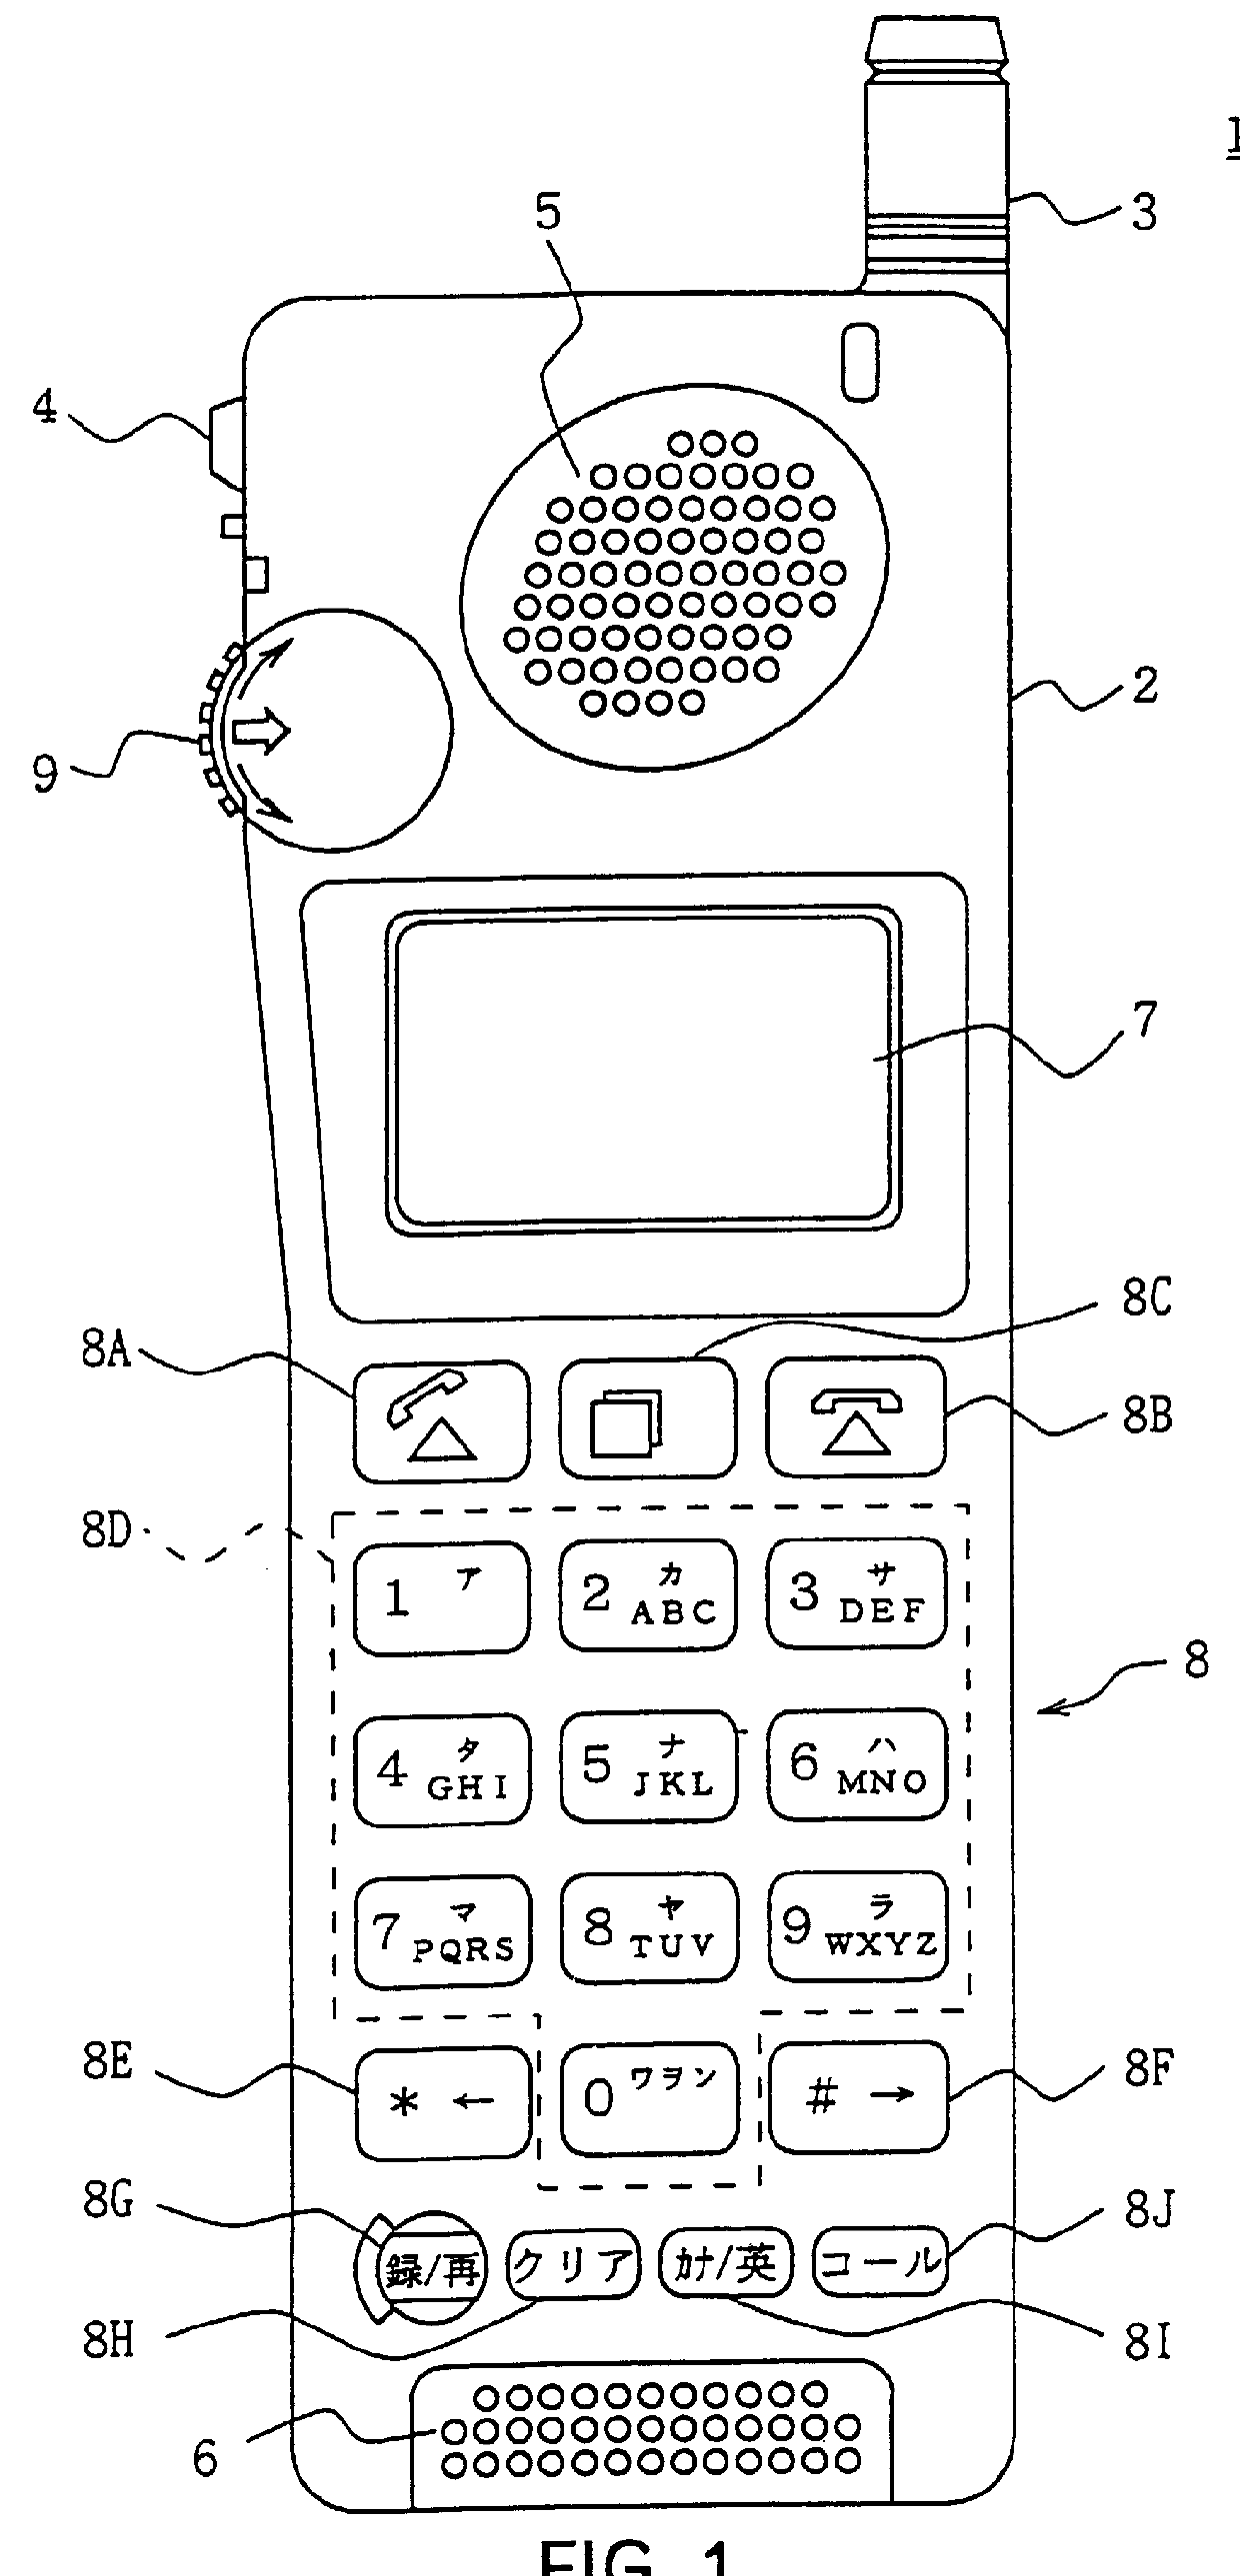 Communication terminal device, call-history memory method and call-history display method